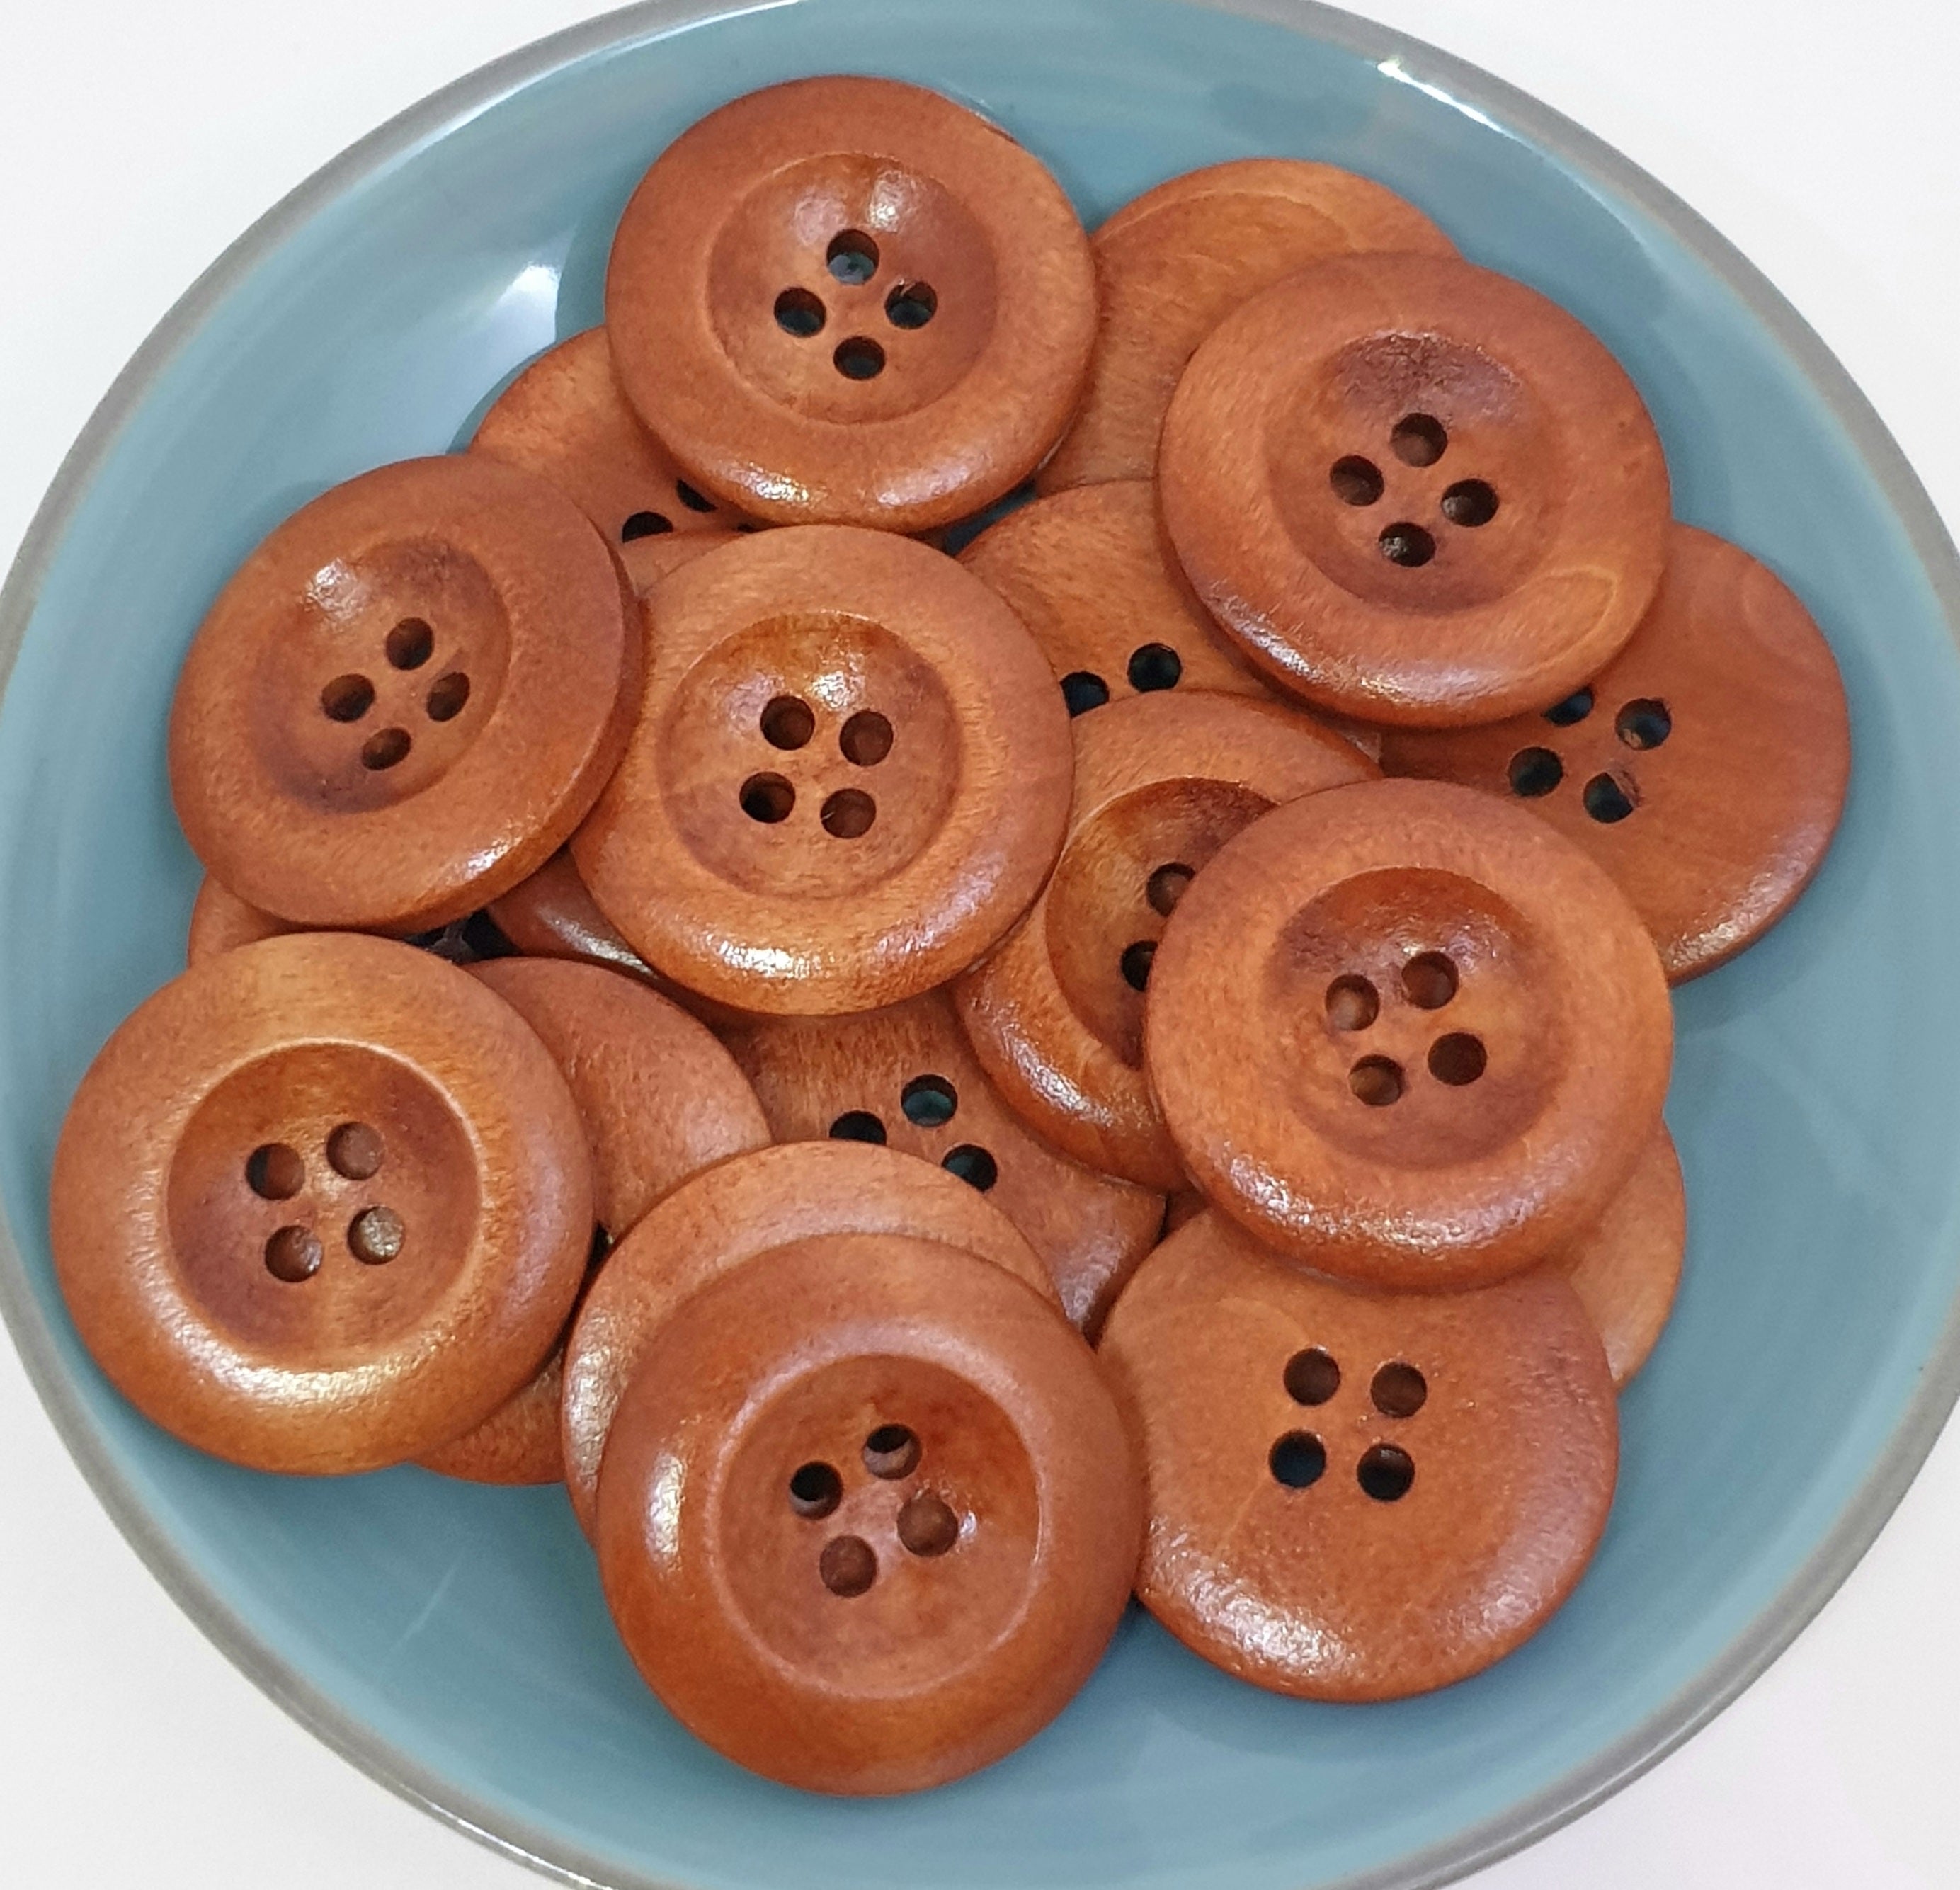 MajorCrafts 24pcs 25mm Ginger Brown Deep Circle Design Round 4 Holes Large Wooden Sewing Buttons